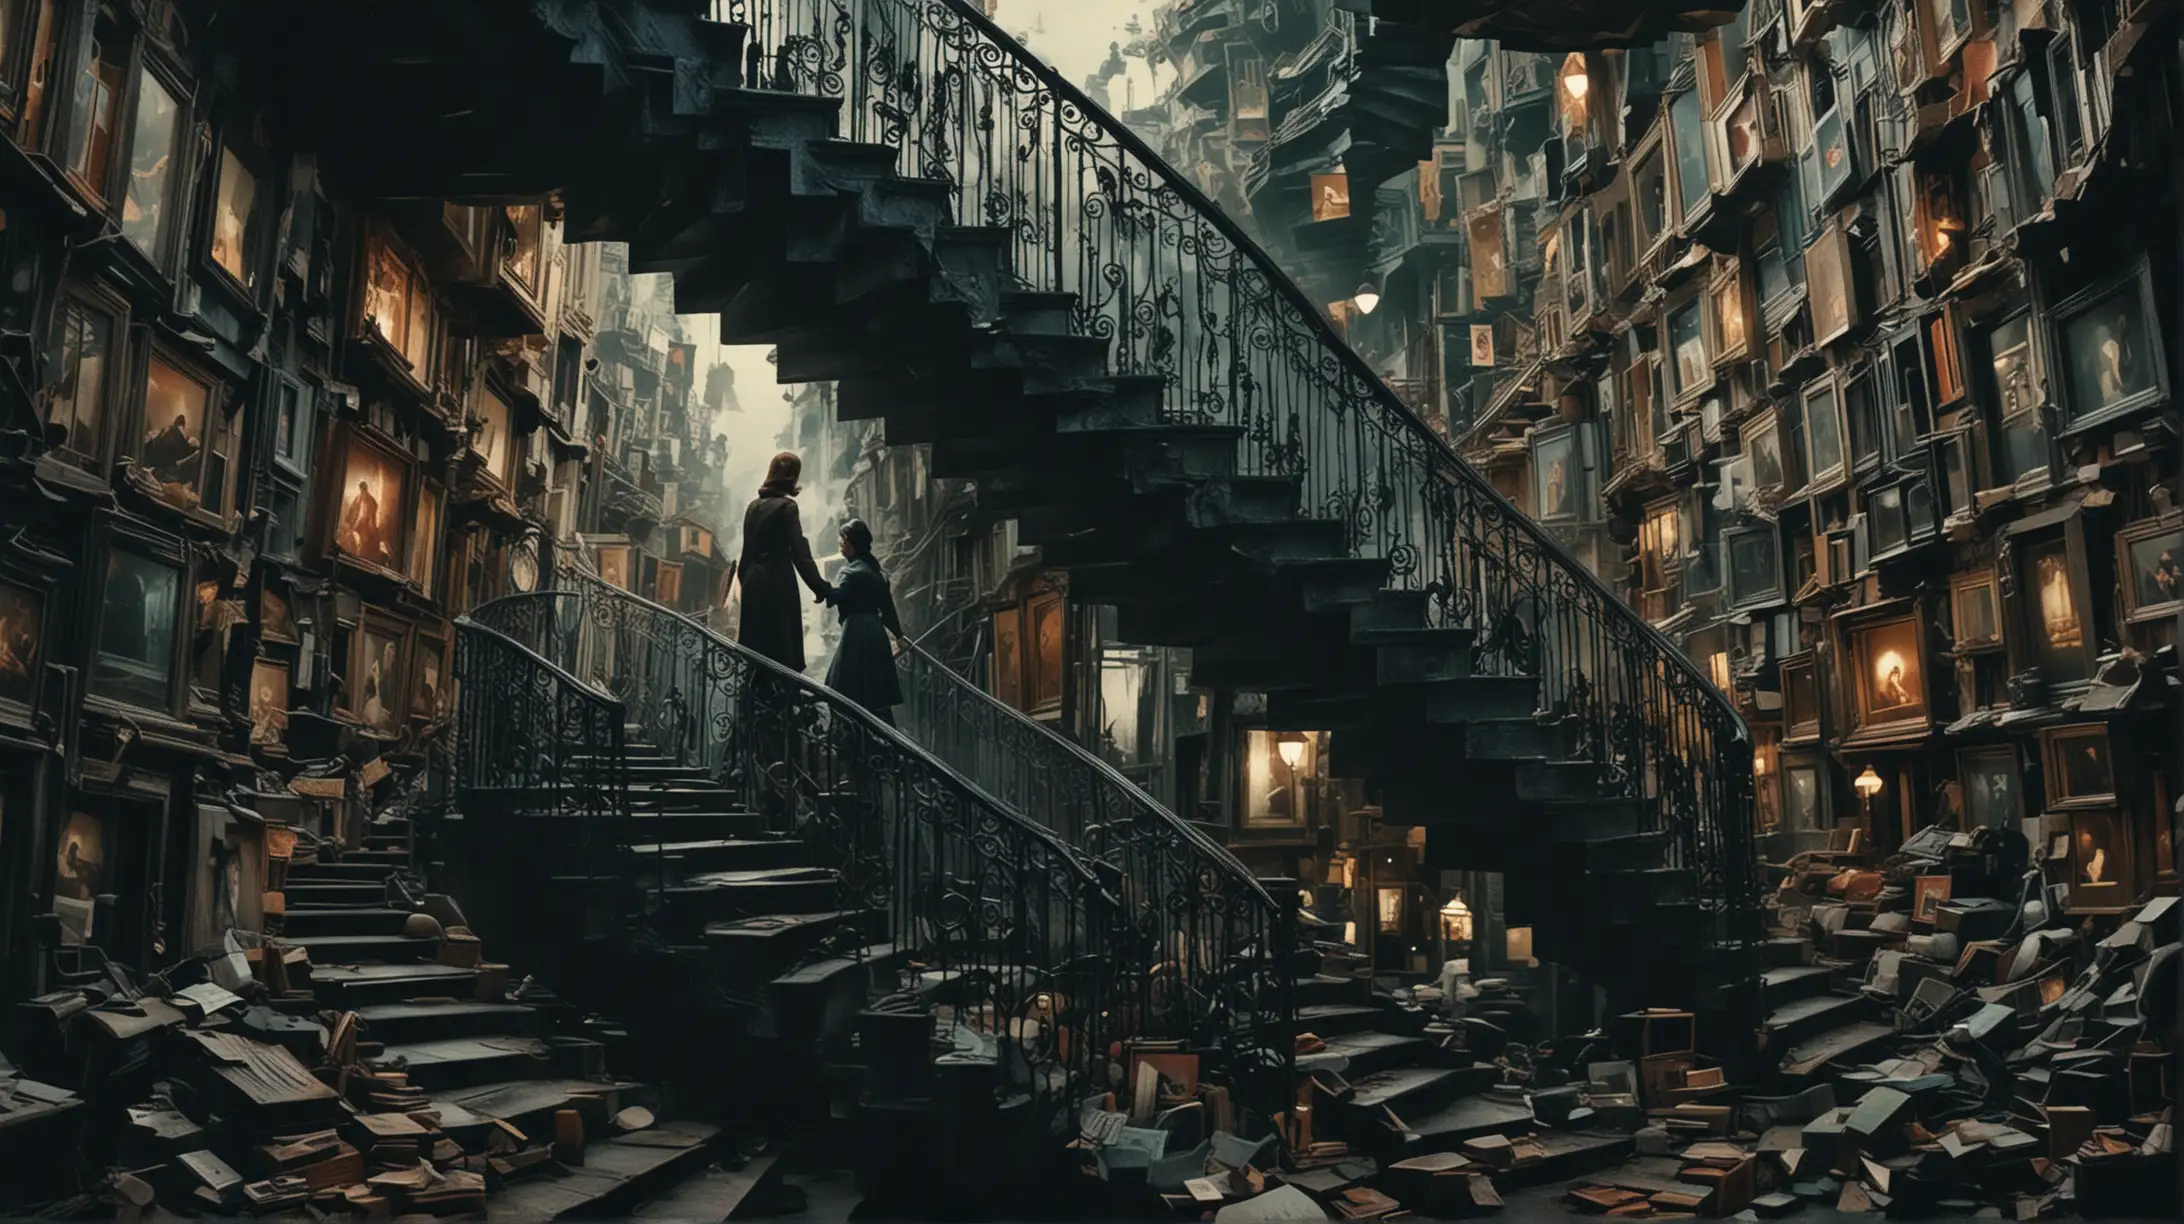 A chaotic yet mesmerizing collage of iconic scenes from mind-bending movies, featuring swirling staircases, fragmented faces, and dreamlike landscapes in a dark, moody color palette.